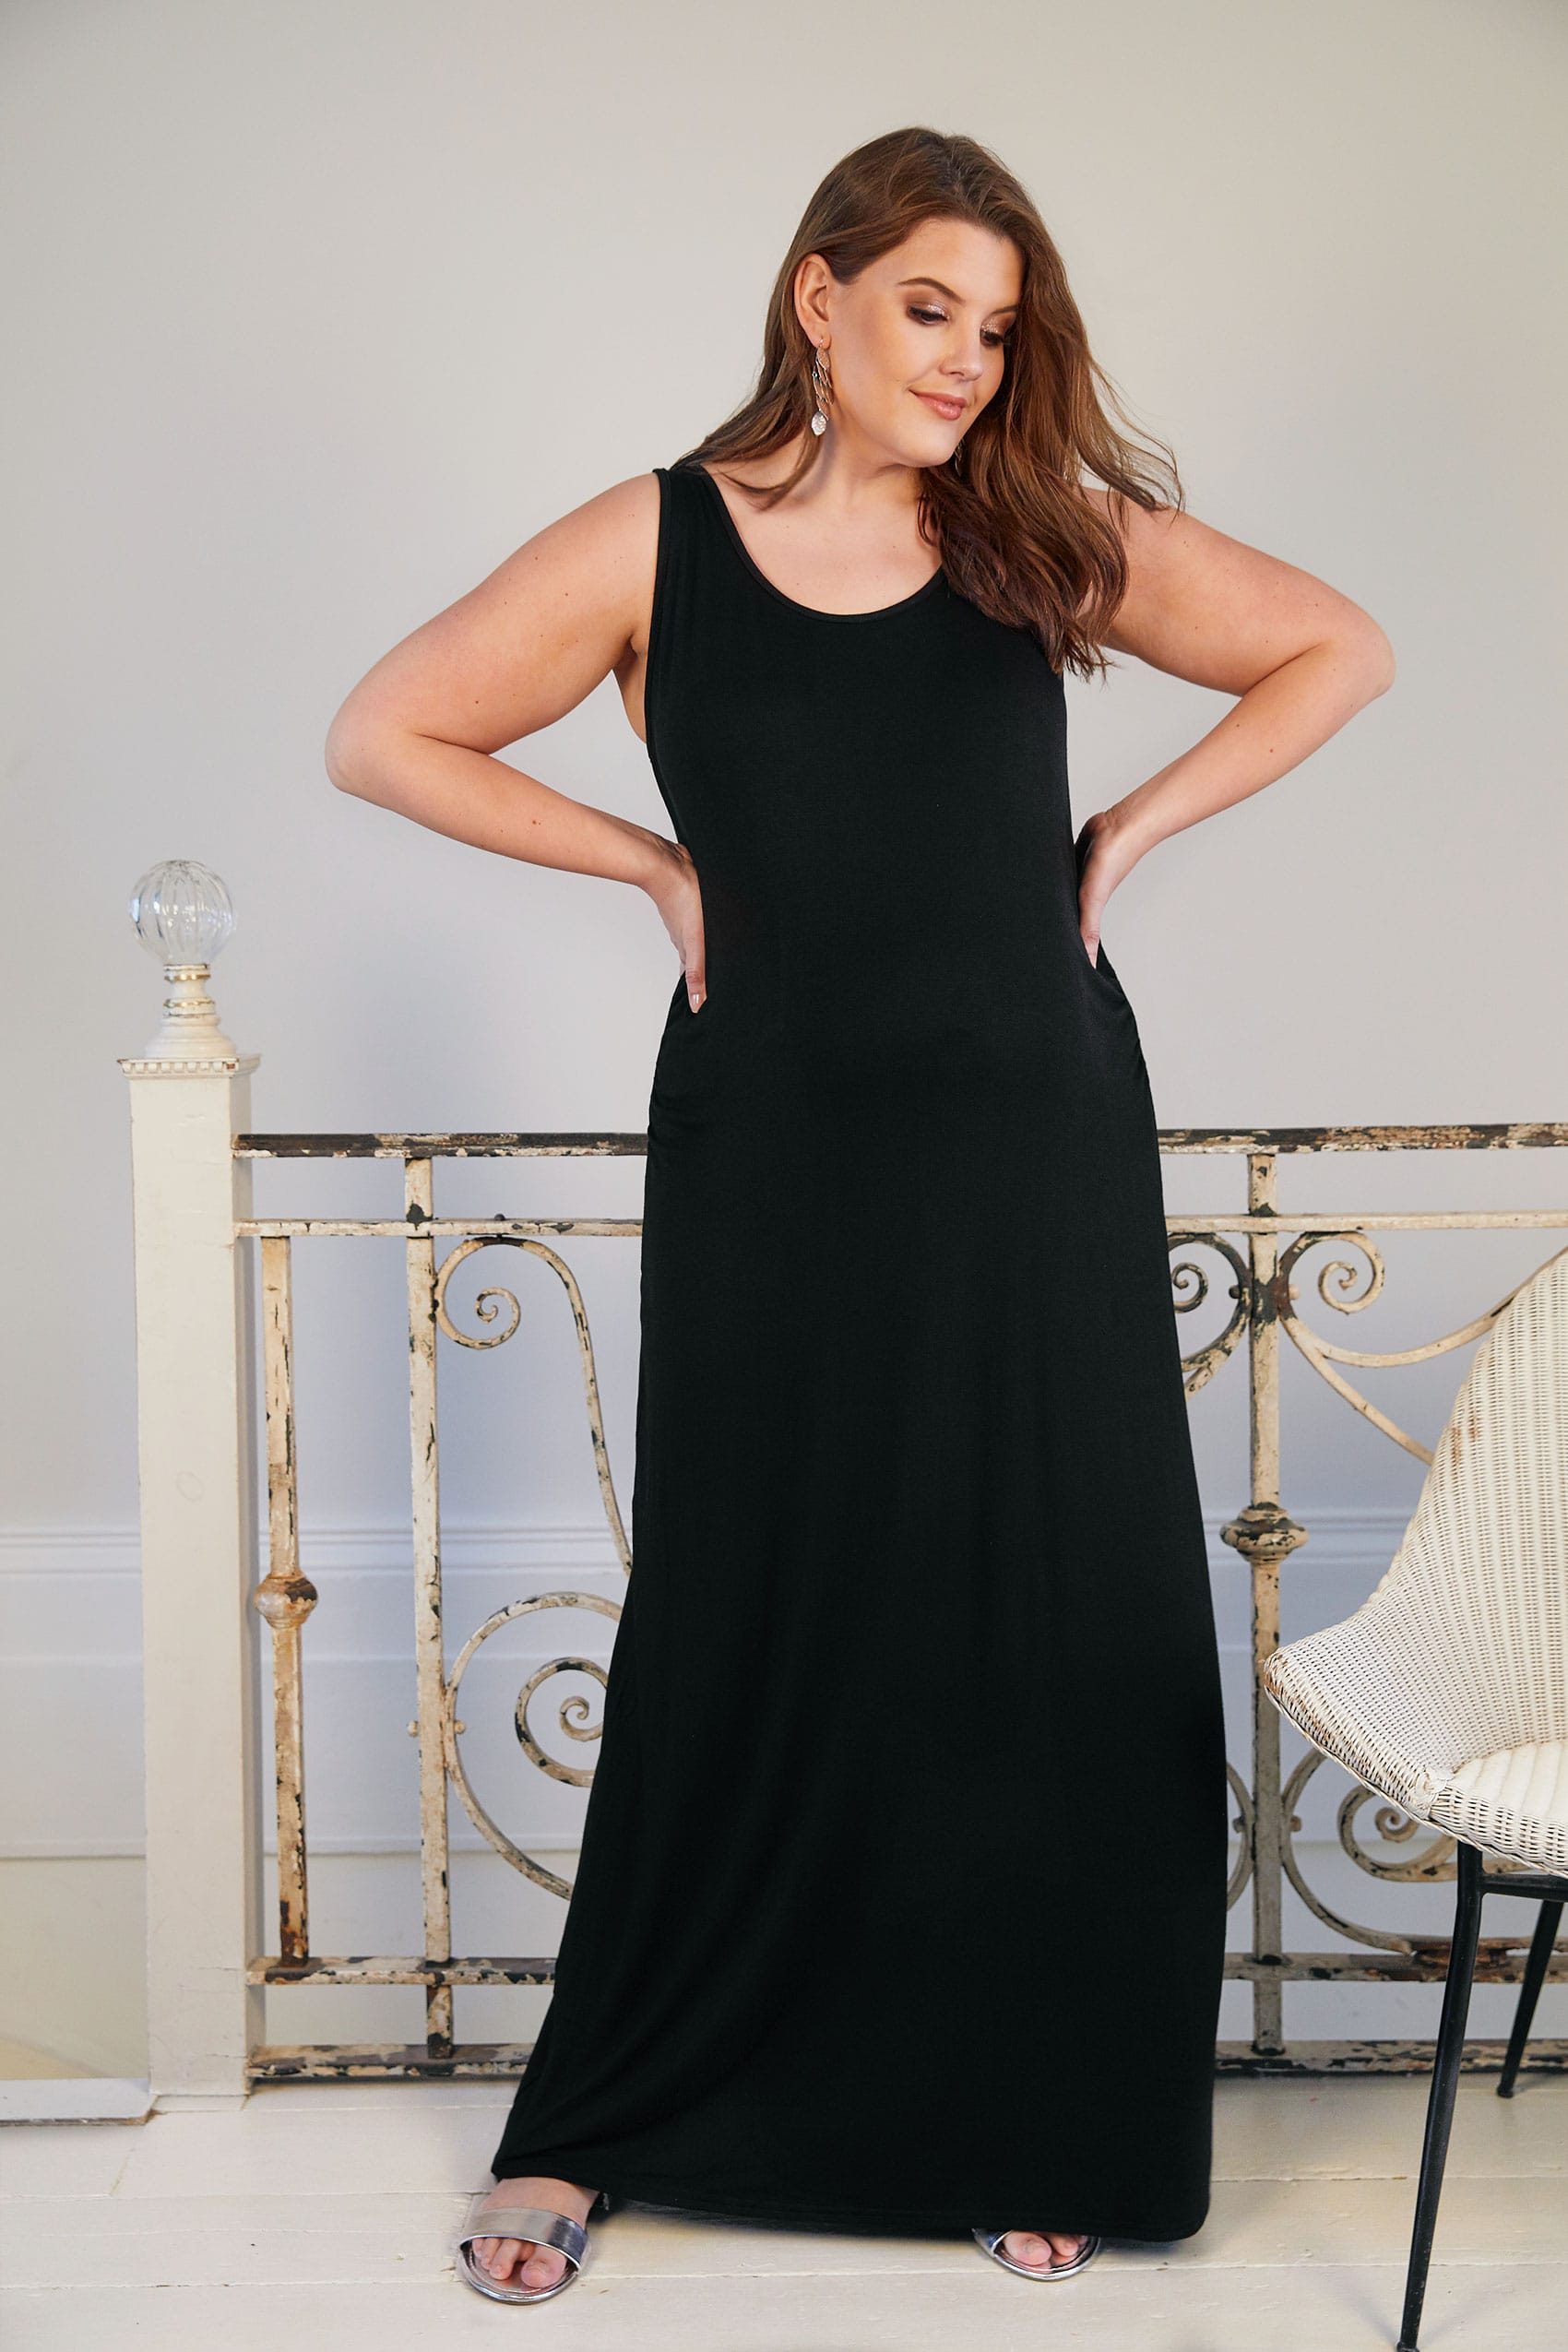 BUMP IT UP MATERNITY Black Ruched Side Maxi Dress Plus Size 16 to 32